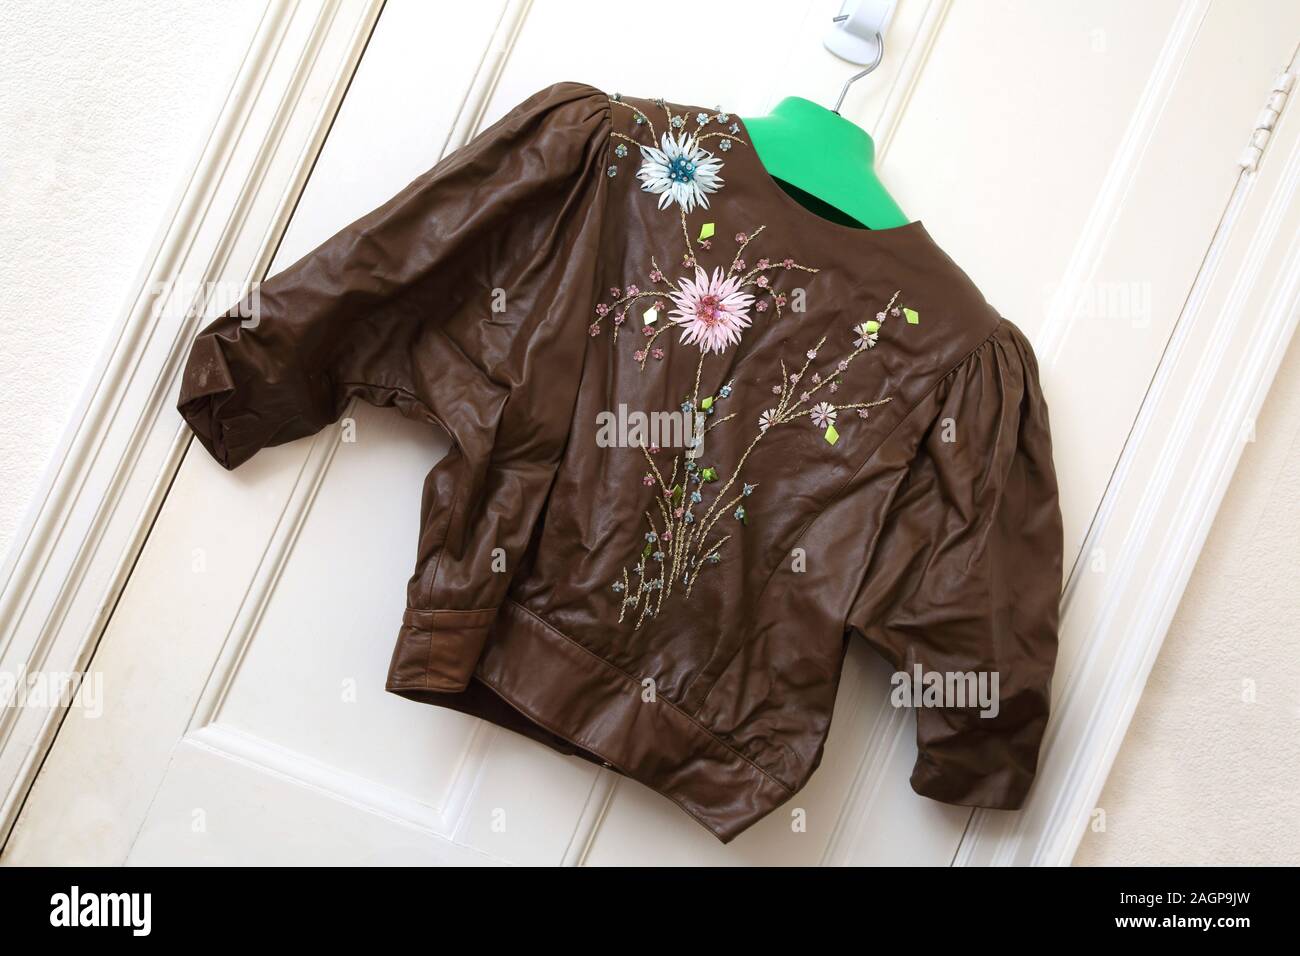 Brown Leather Jacket High Resolution Stock Photography and Images - Alamy